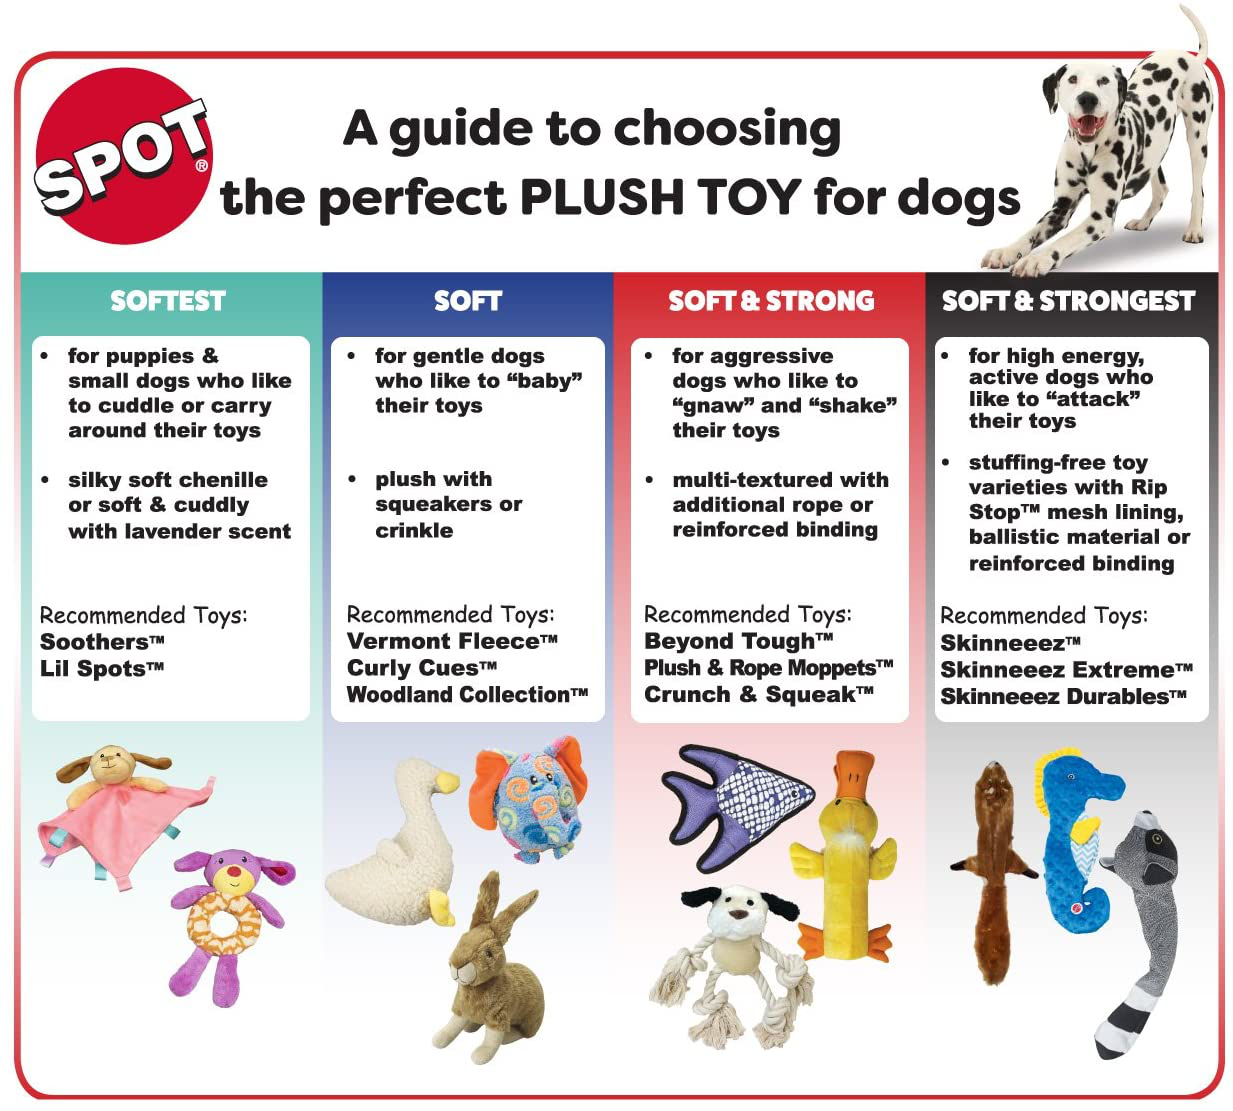 SPOT Skinneeez | Stuffless Dog Toy with Squeaker for All Dogs | Tug-Of-War Toy for Small and Large Breeds | 23" | Fox Design | by Ethical Pet Animals & Pet Supplies > Pet Supplies > Dog Supplies > Dog Toys Ethical Products   